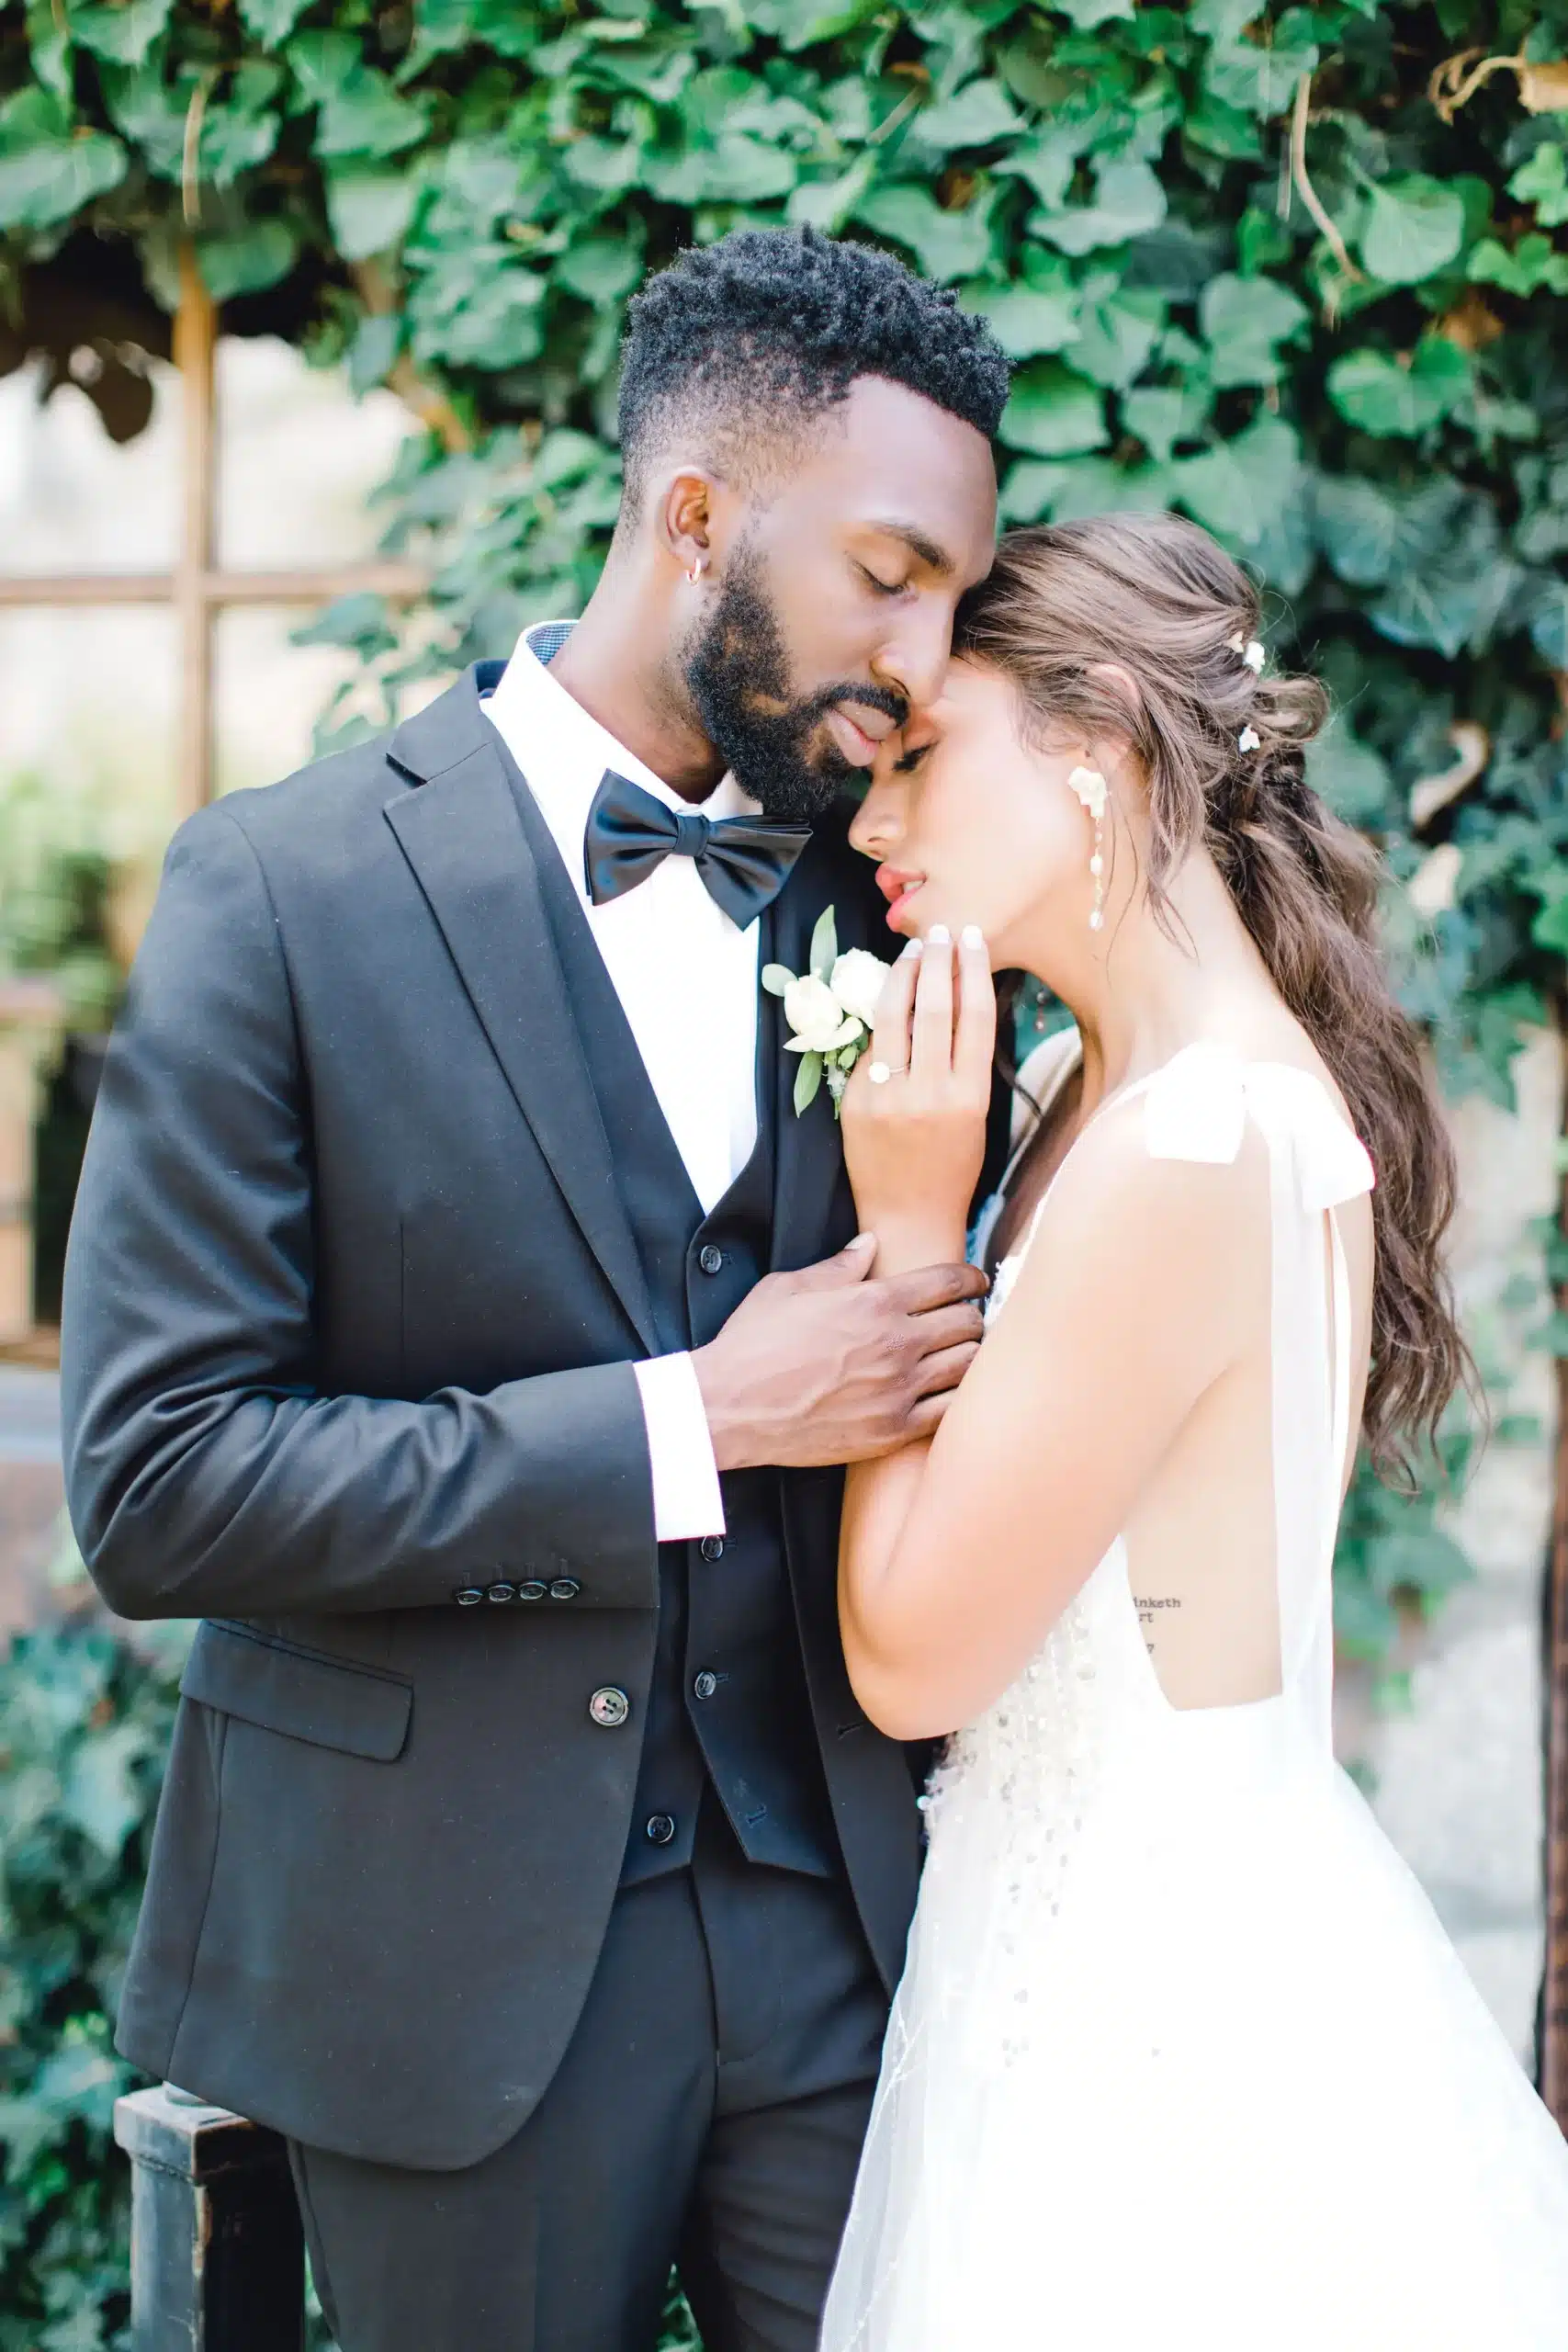 Groom wearing a black-tie wedding suit and bride in her wedding dress holding each other with their eyes closed